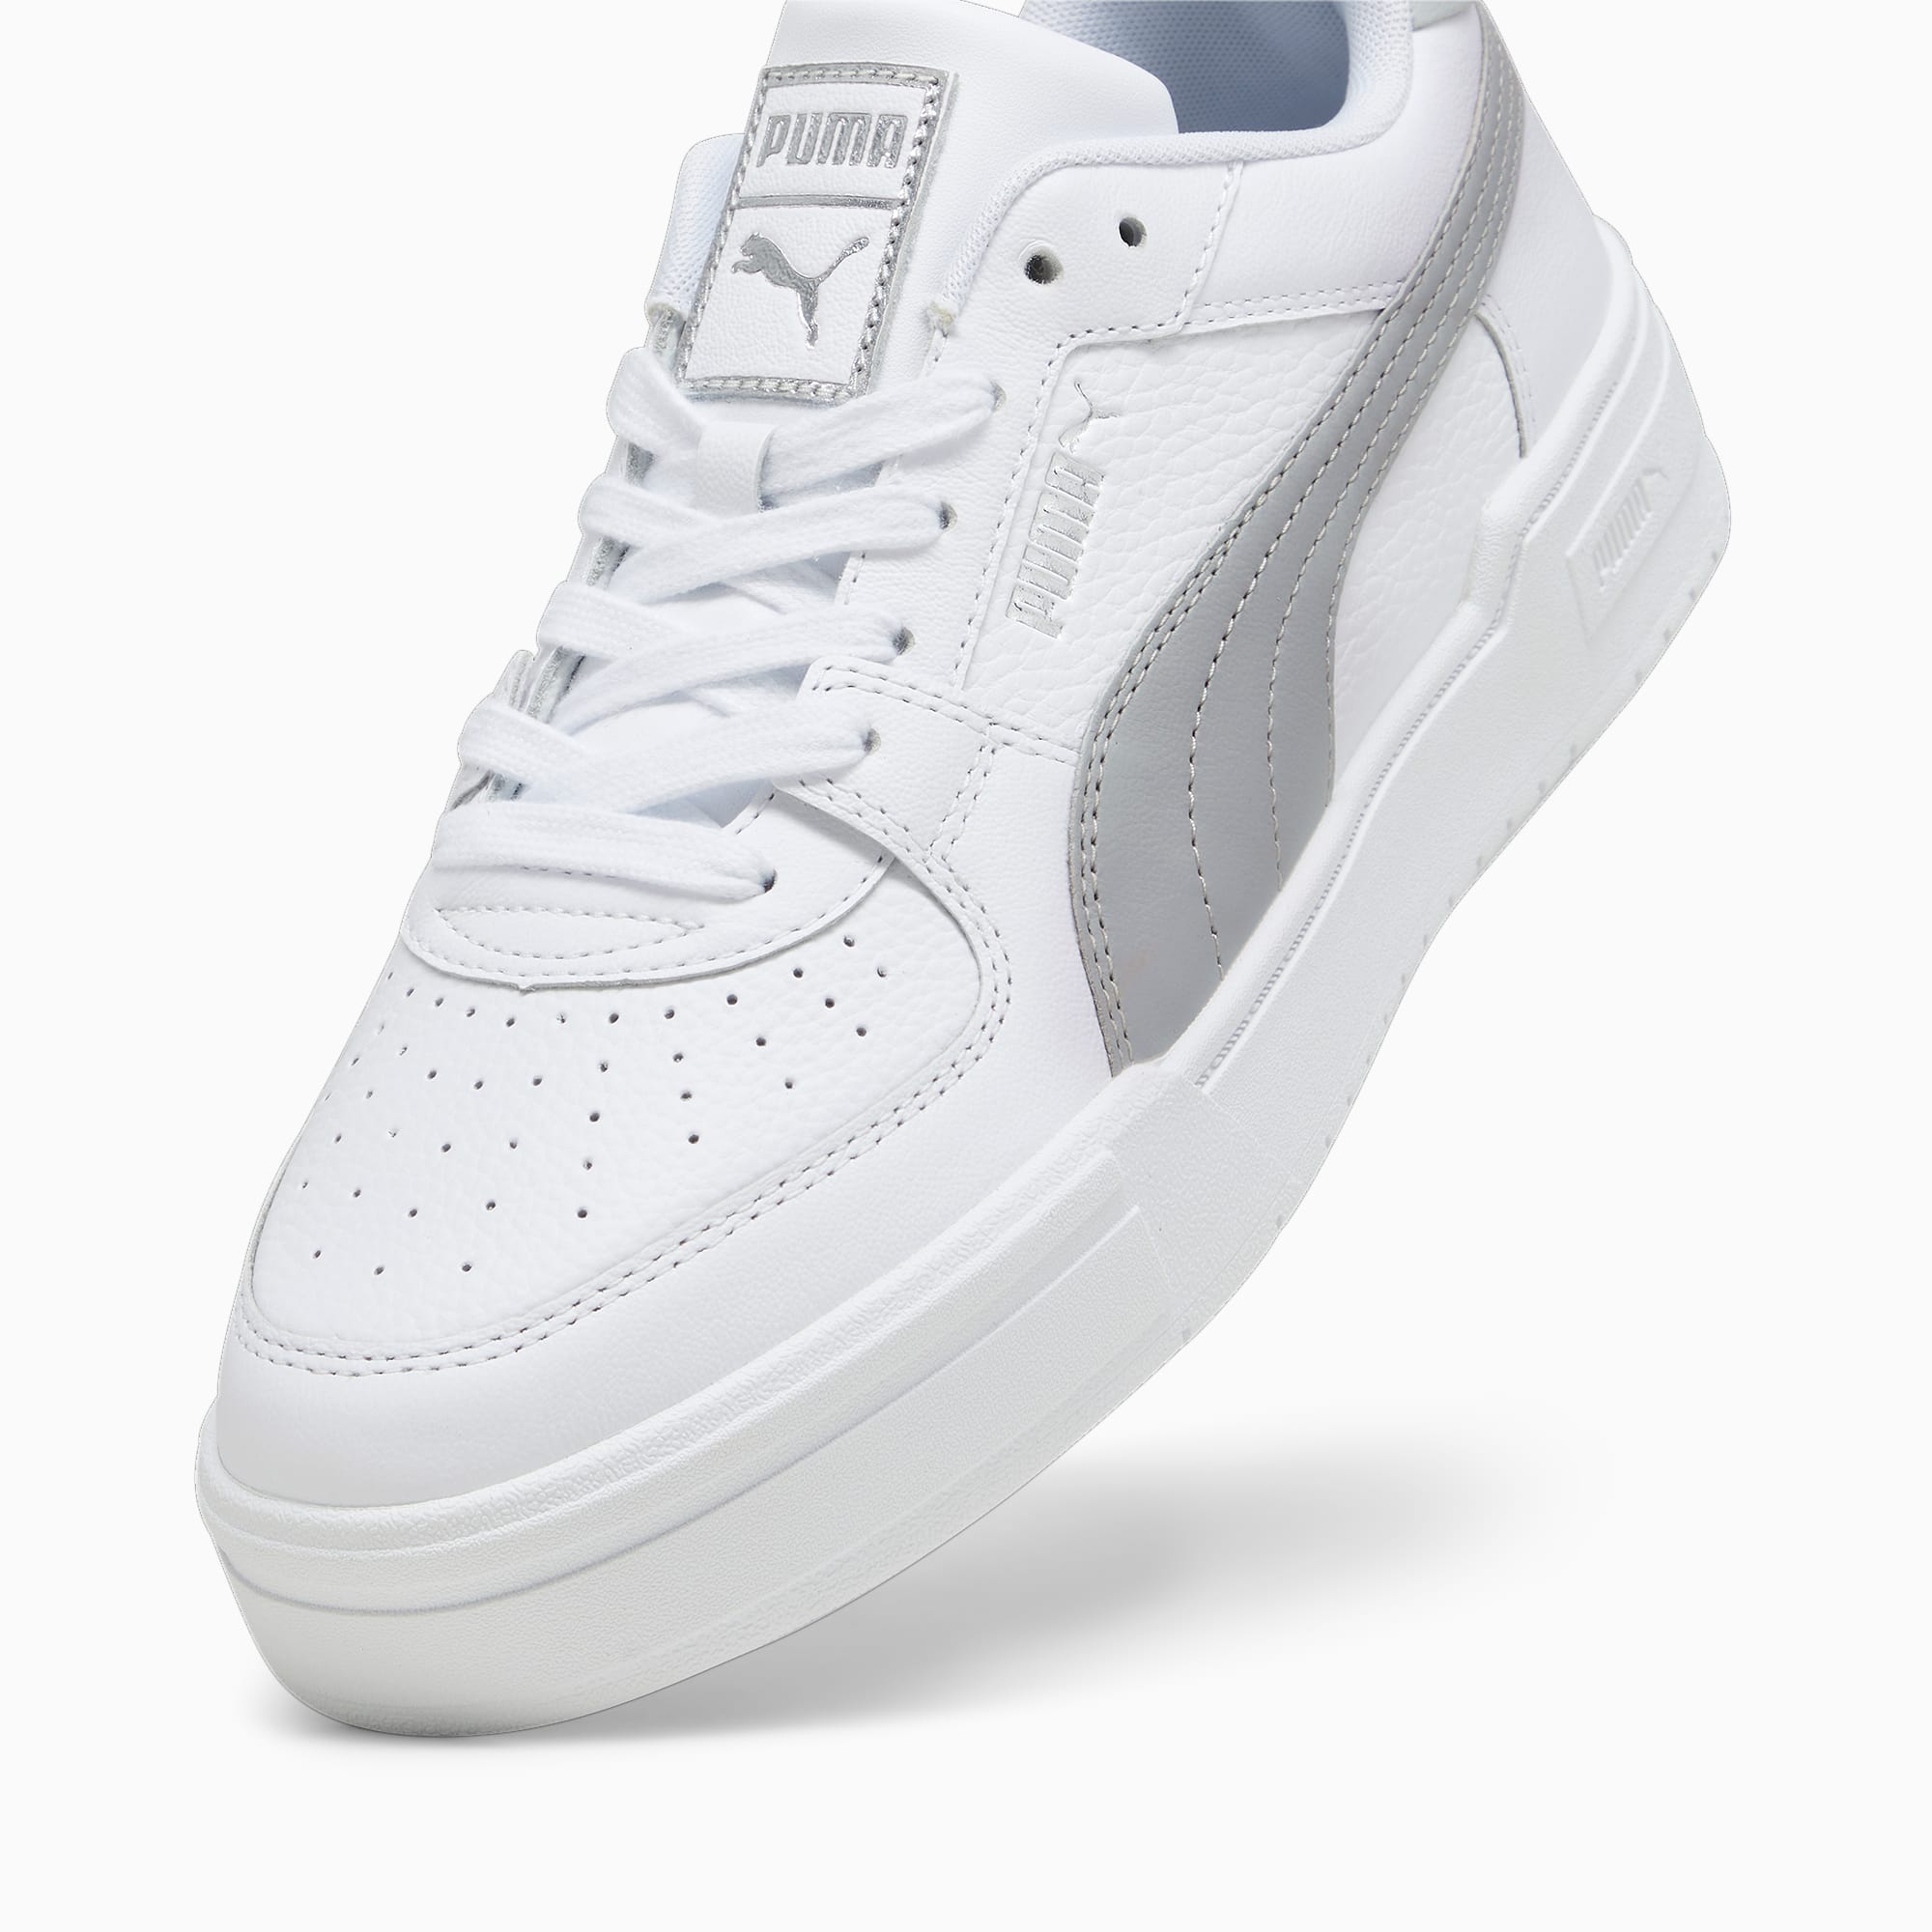 Women's PUMA Ca Pro Classic Trainers, White/Cool Light Grey, Size 53,5, Shoes